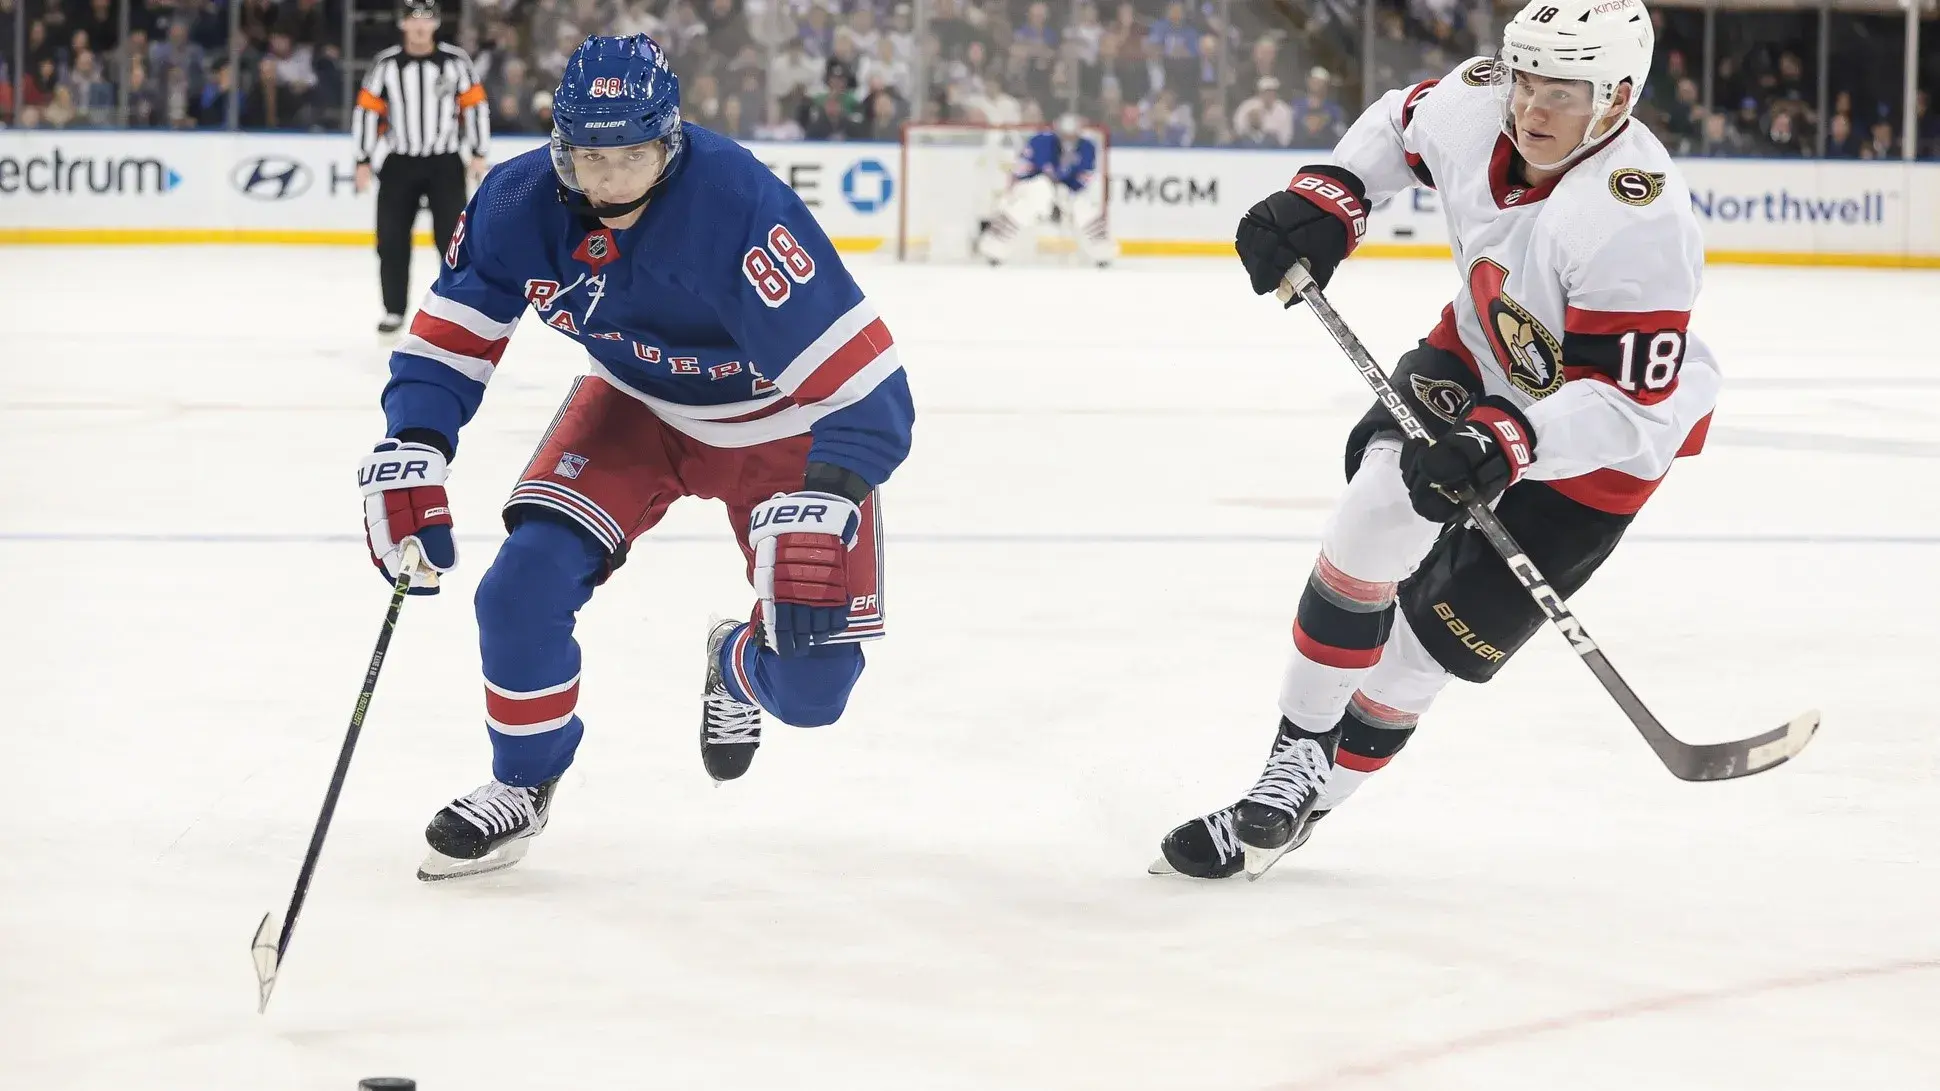 Mar 2, 2023; New York, New York, USA; New York Rangers right wing Patrick Kane (88) skates with the puck against Ottawa Senators left wing Tim Stutzle (18) during the second period at Madison Square Garden. / Vincent Carchietta-USA TODAY Sports